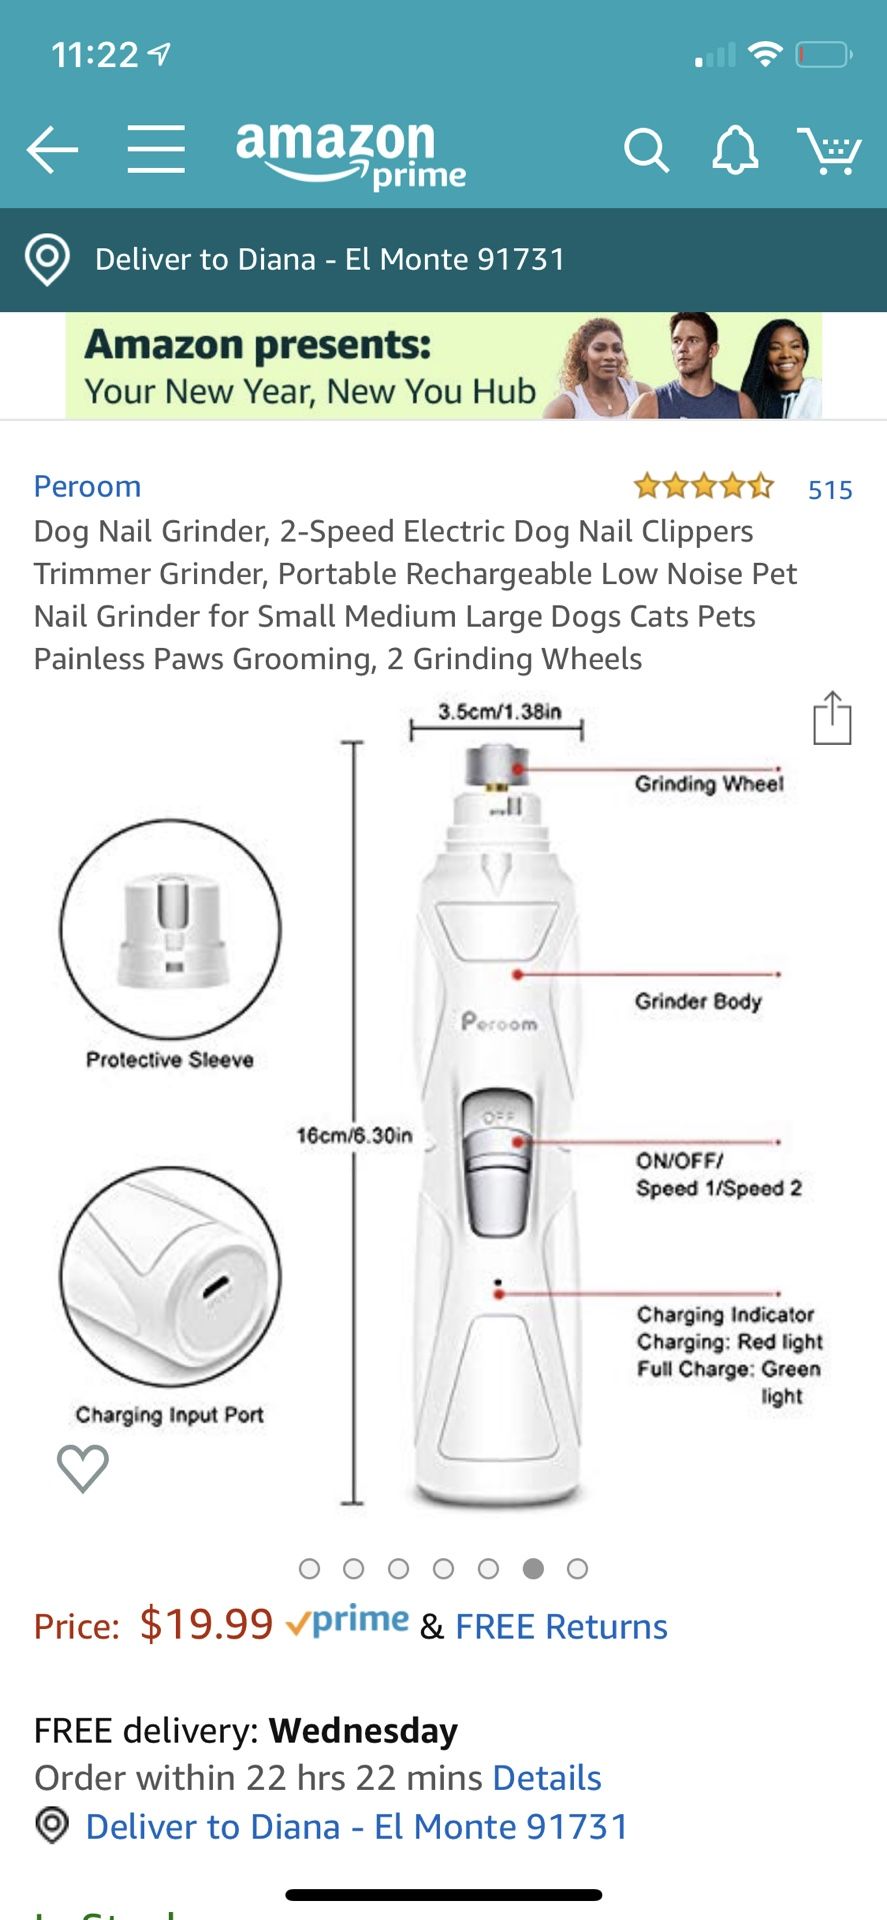 Dog Nail Grinder, 2-Speed Electric Dog Nail Clippers Trimmer Grinder, Portable Rechargeable Low Noise Pet Nail Grinder for Small Medium Large Dogs Ca